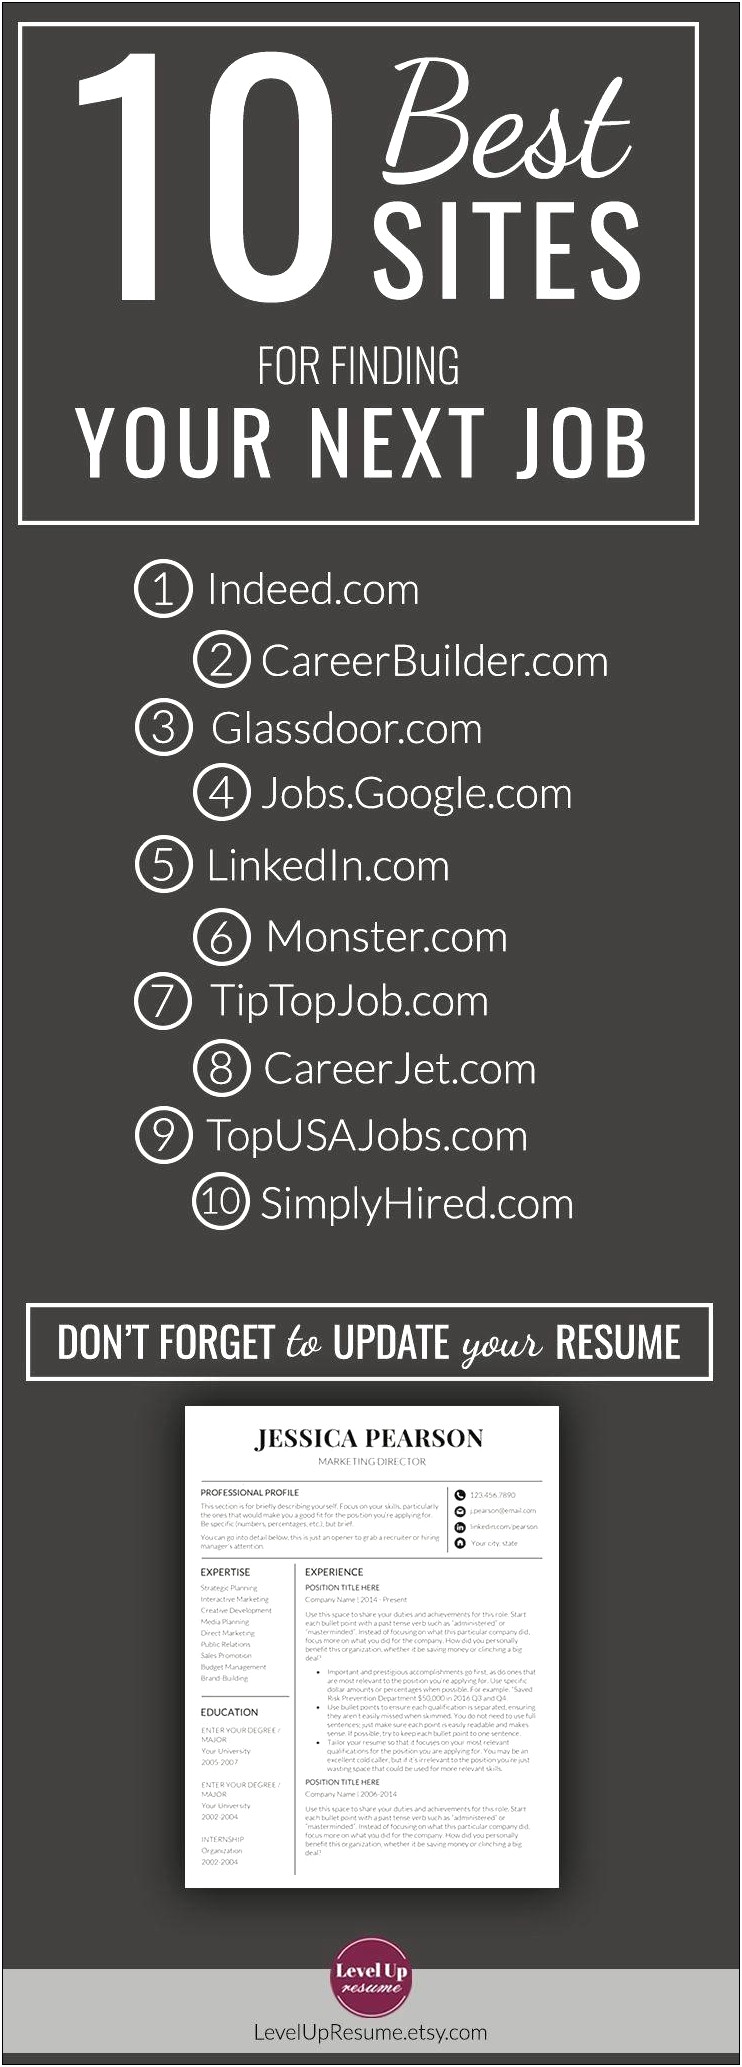 Administrative Assistant Resume Objective Examples Monster.commonster